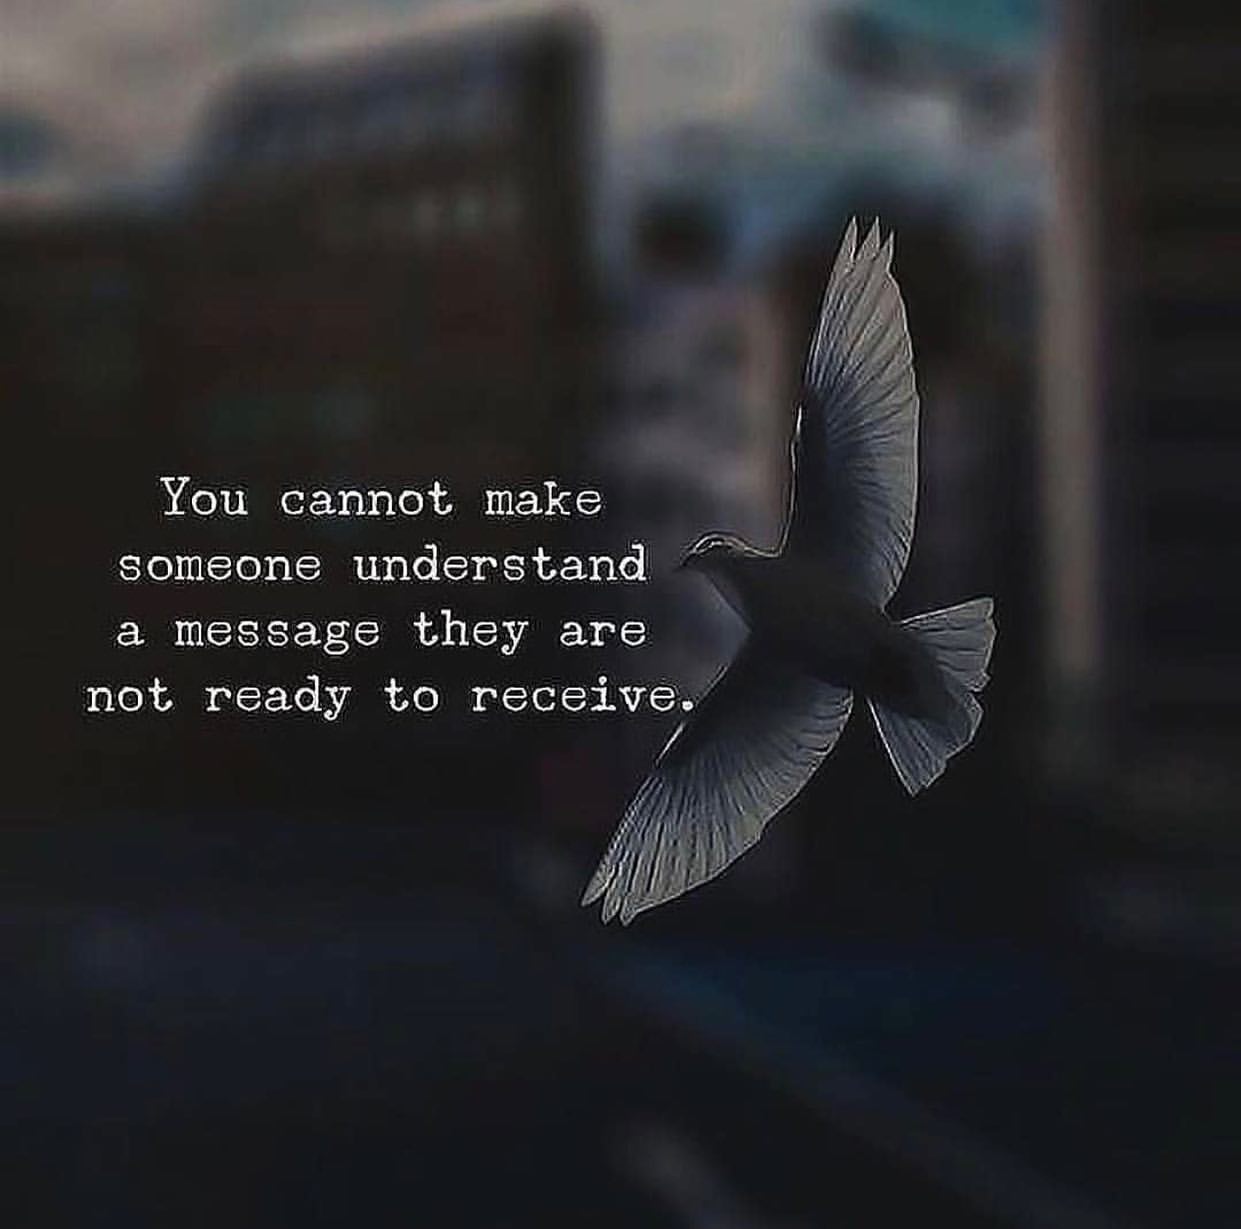 You cannot make someone understand a message they are not ready to receive.